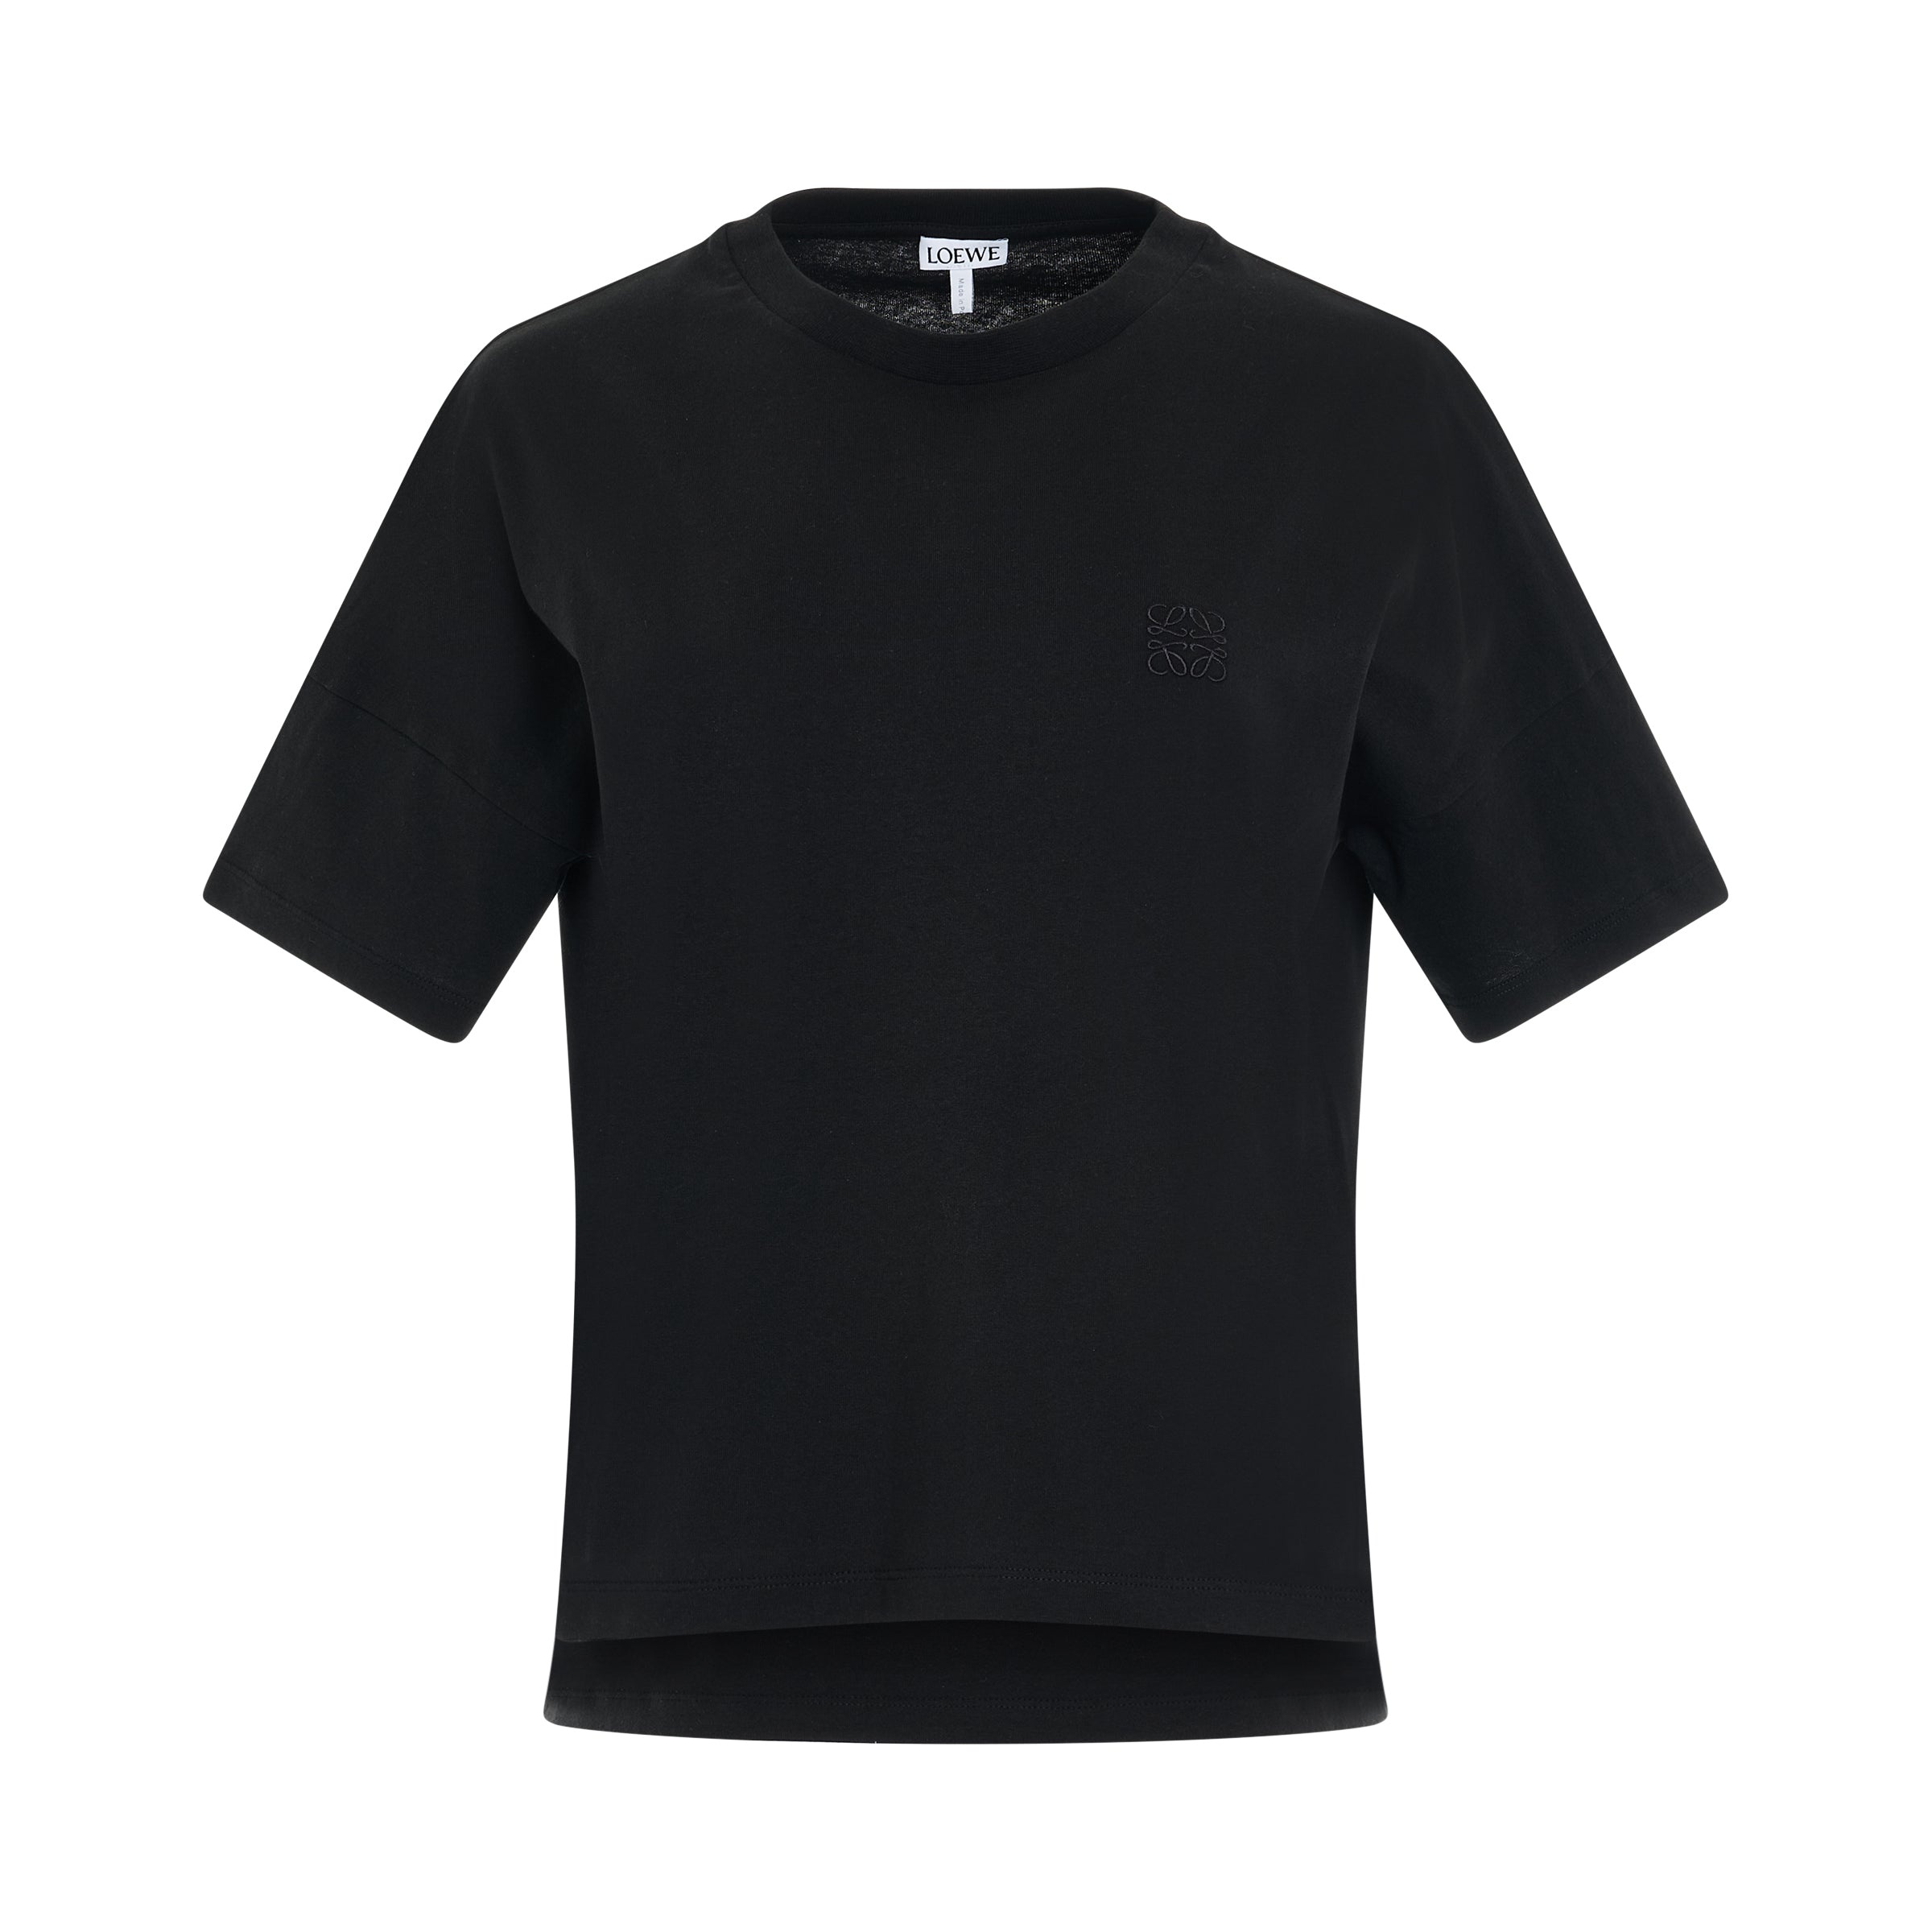 Anagram Boxy Fit T-Shirt in Black - 1